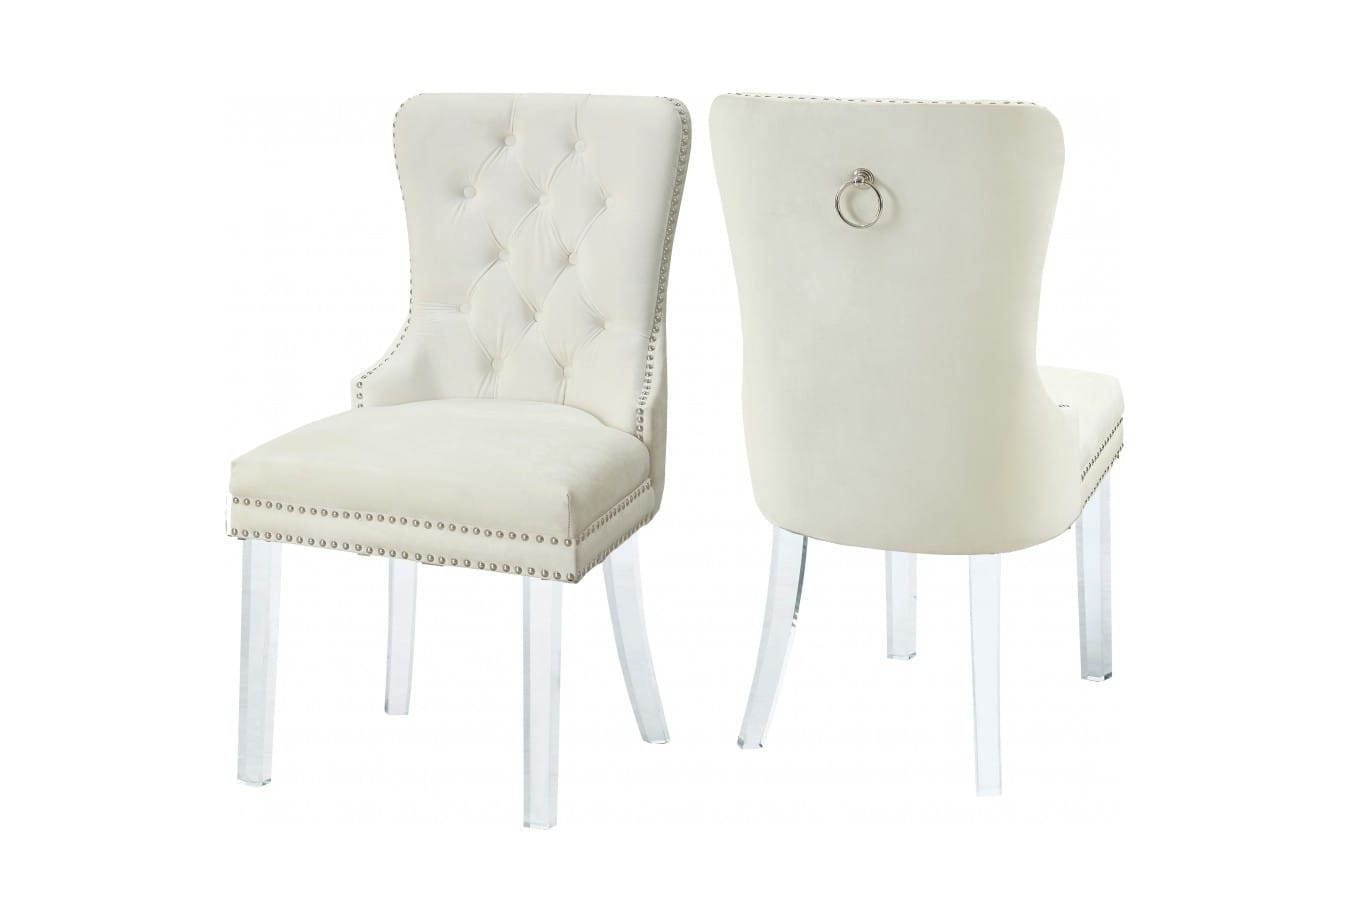 Miley Cream Velvet Dining Chairs W Acrylic Legs Set Of 2 By Meridian Furniture